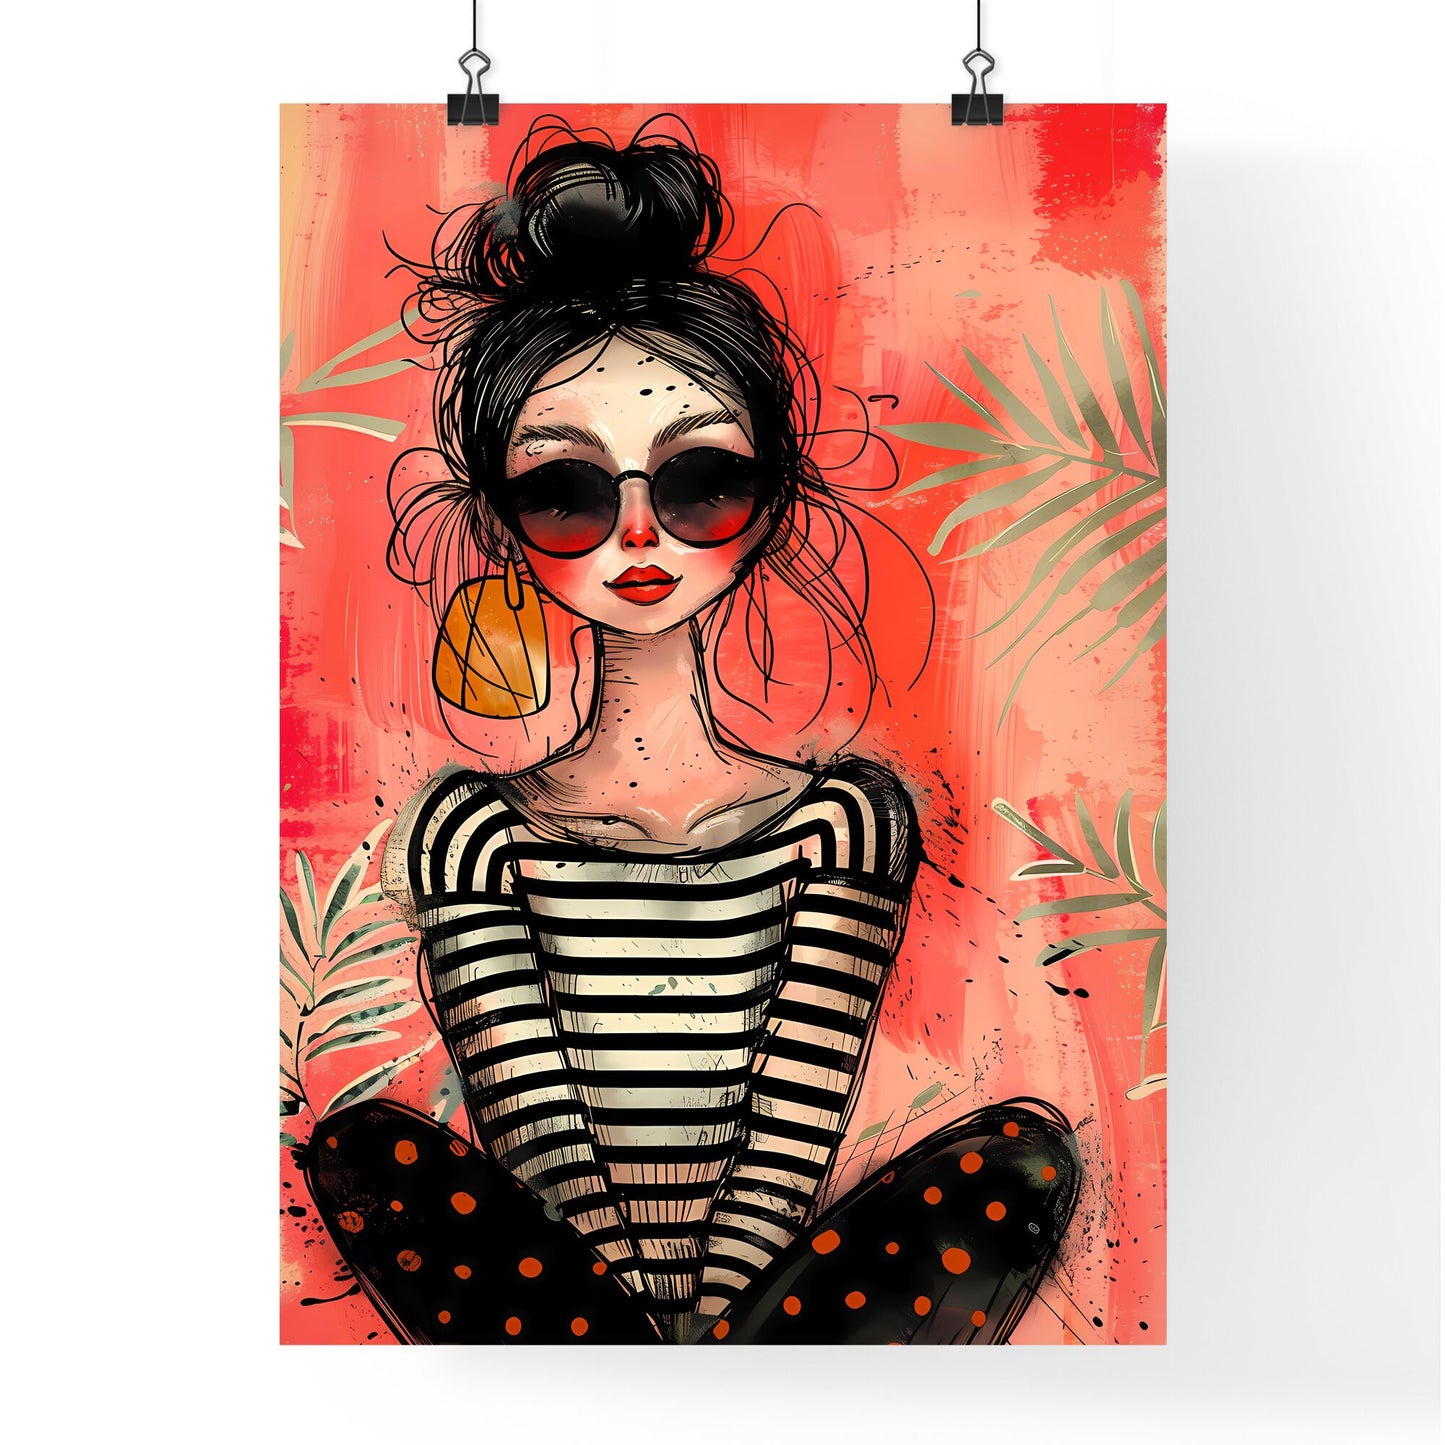 Vibrant Quirky Painting: Trendy Art Featuring Woman in Sunglasses and Striped Shirt Default Title